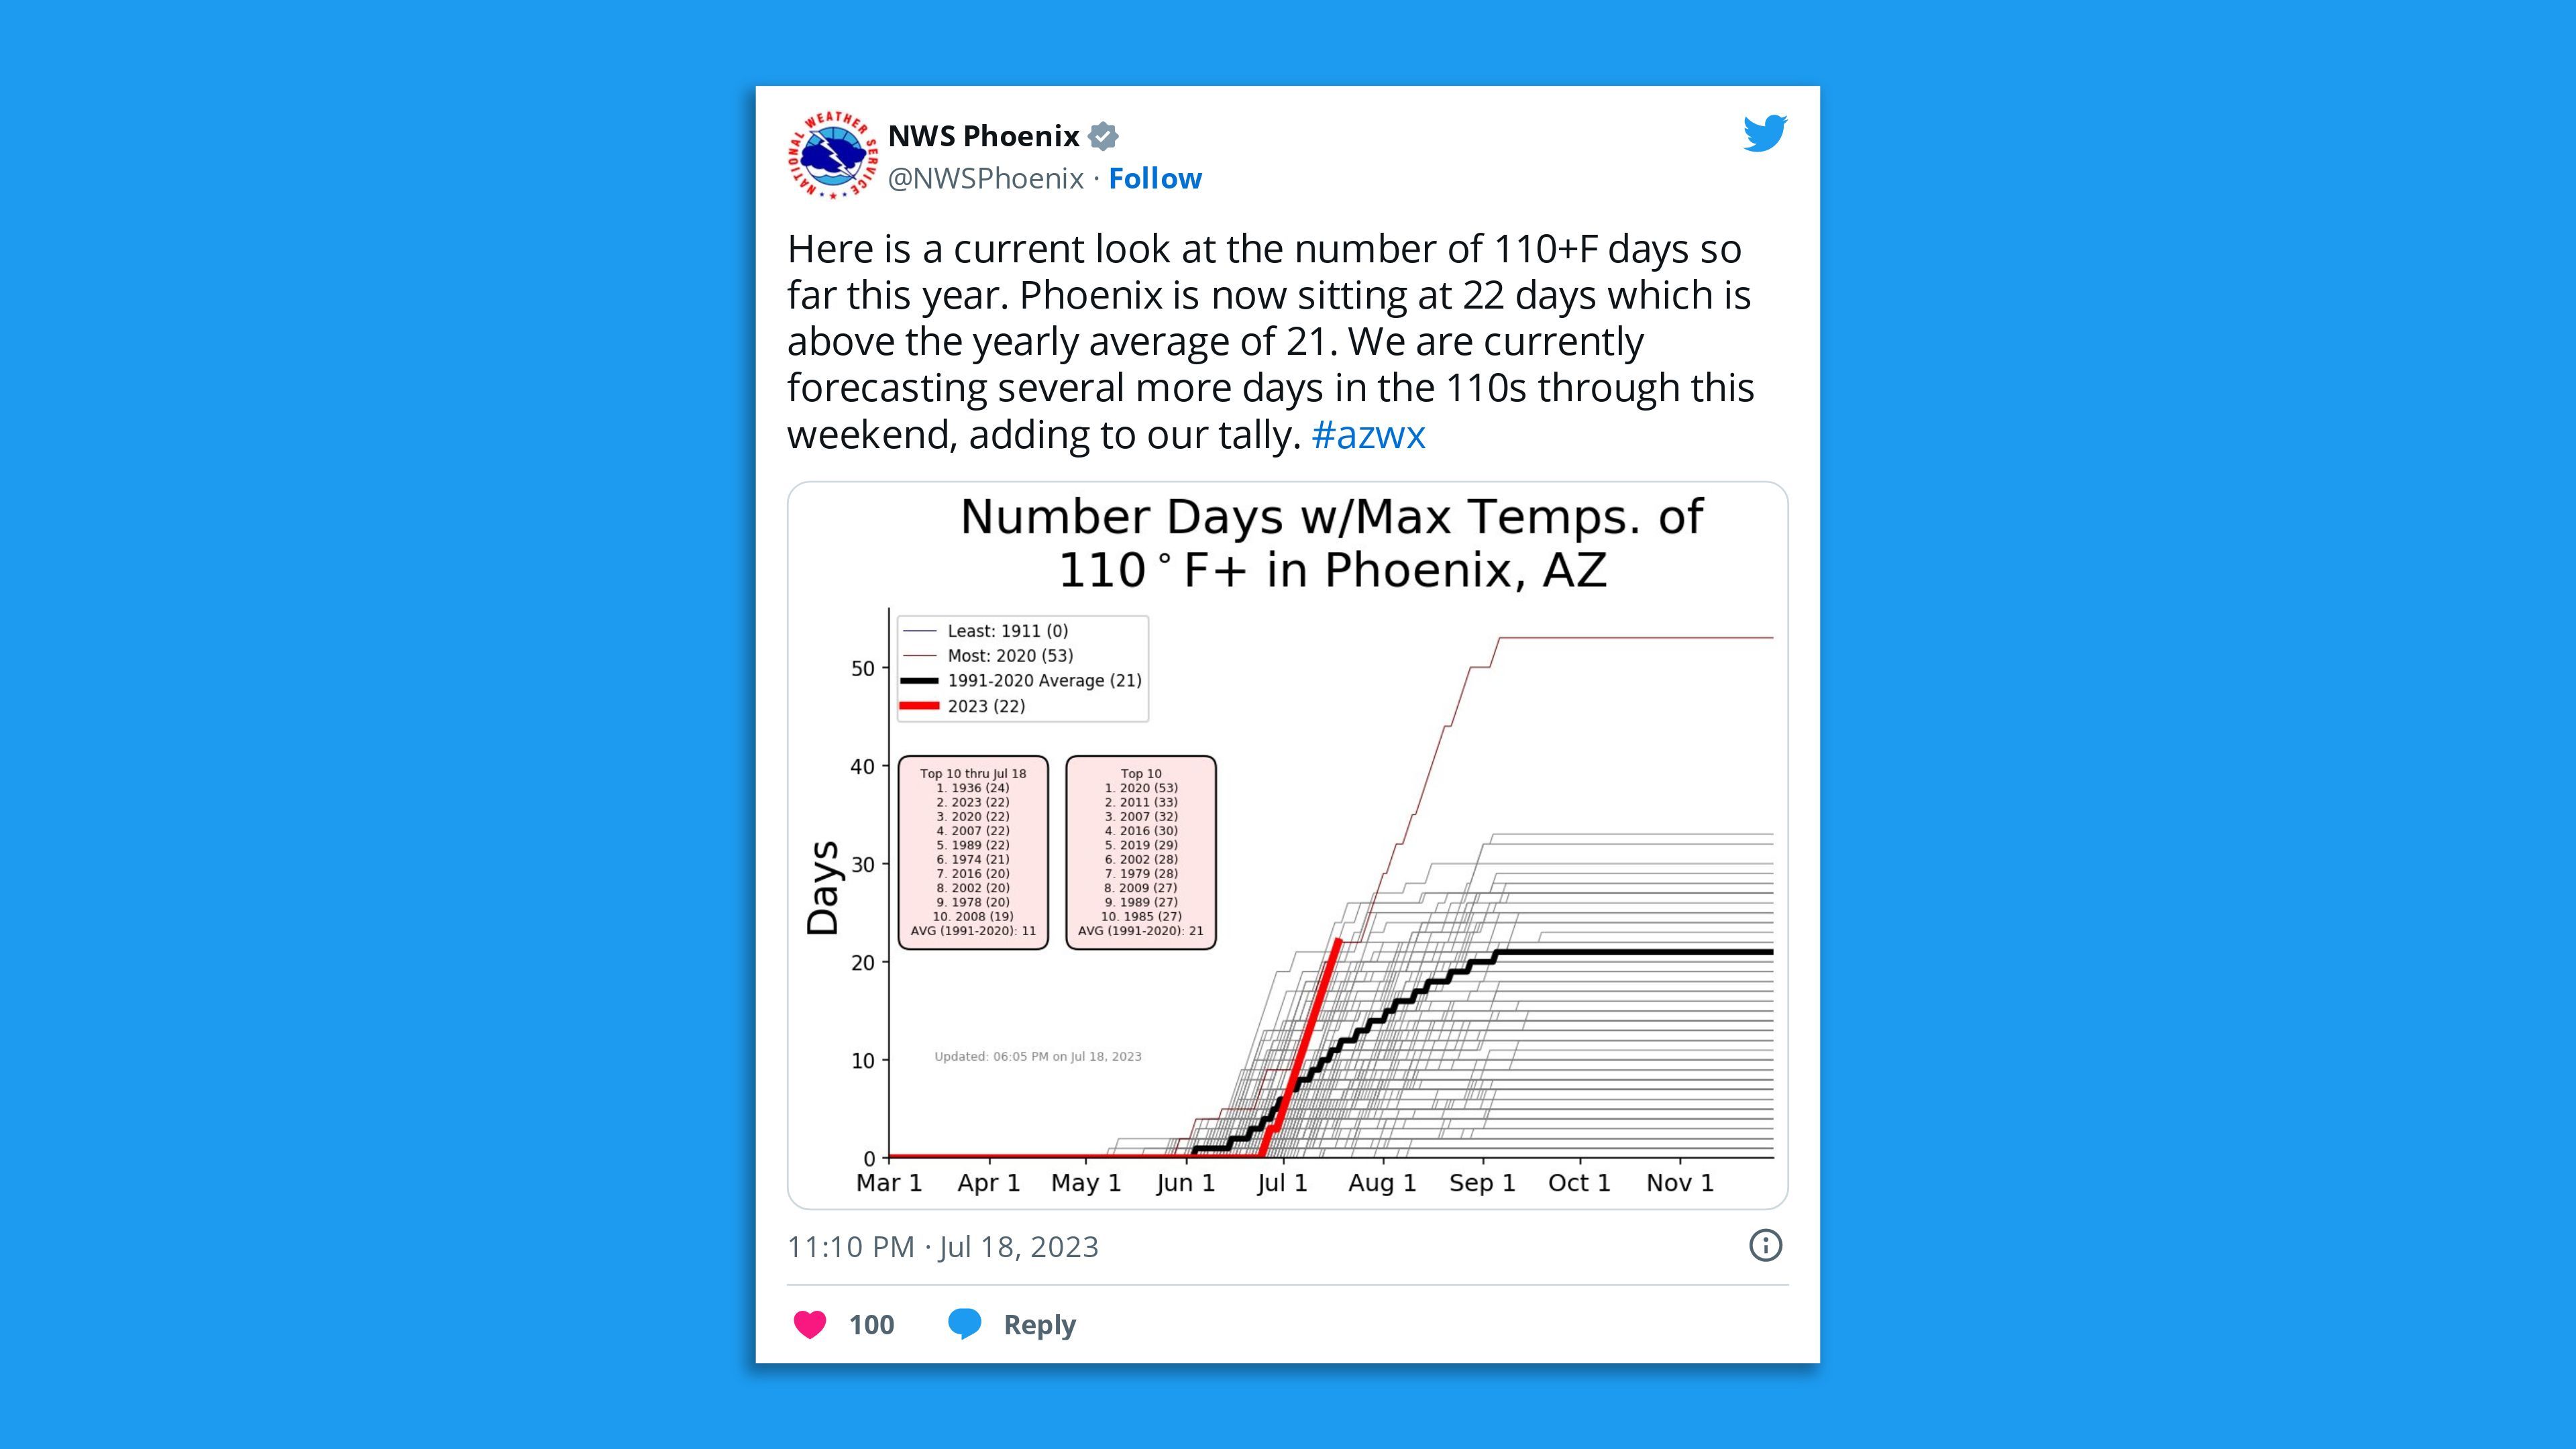 A screenshot of an NWS Phoenix tweet, saying: "Here is a current look at the number of 110+F days so far this year. Phoenix is now sitting at 22 days which is above the yearly average of 21. We are currently forecasting several more days in the 110s through this weekend, adding to our tally."